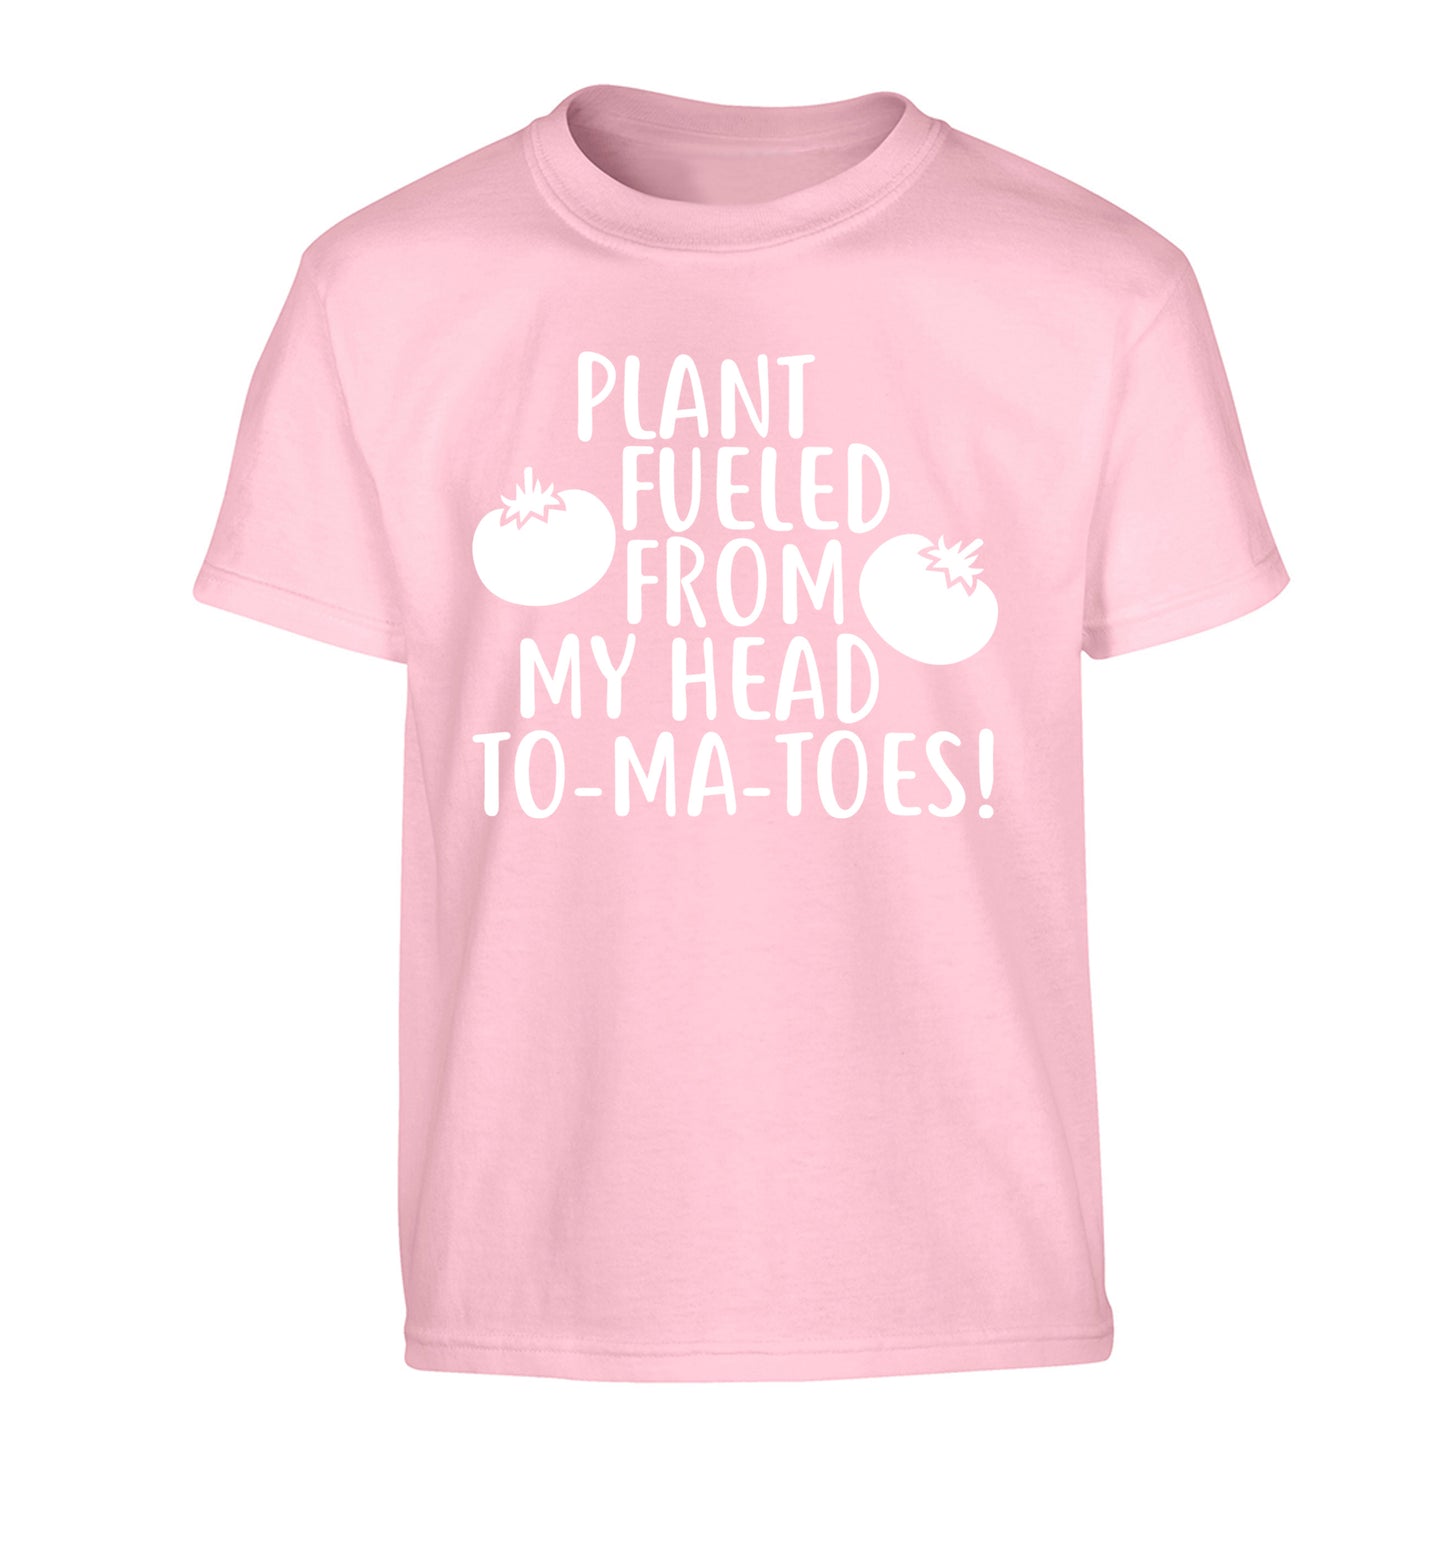 Plant fueled from my head to-ma-toes Children's light pink Tshirt 12-14 Years